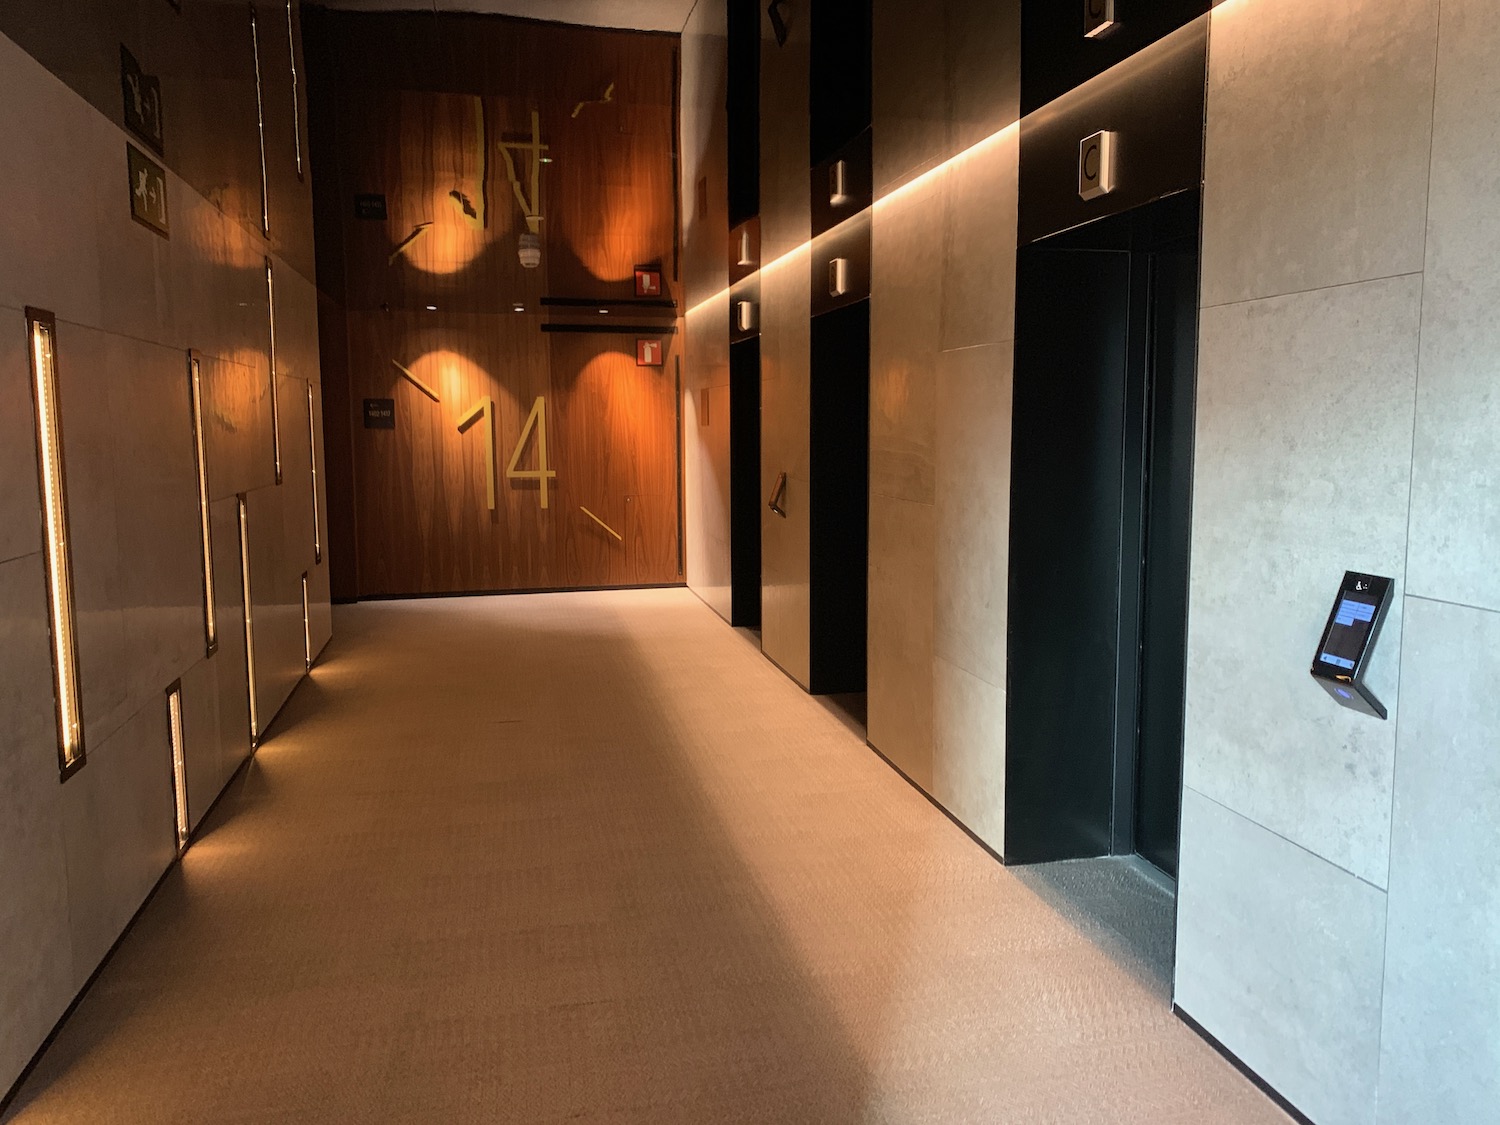 a hallway with elevator doors and lights